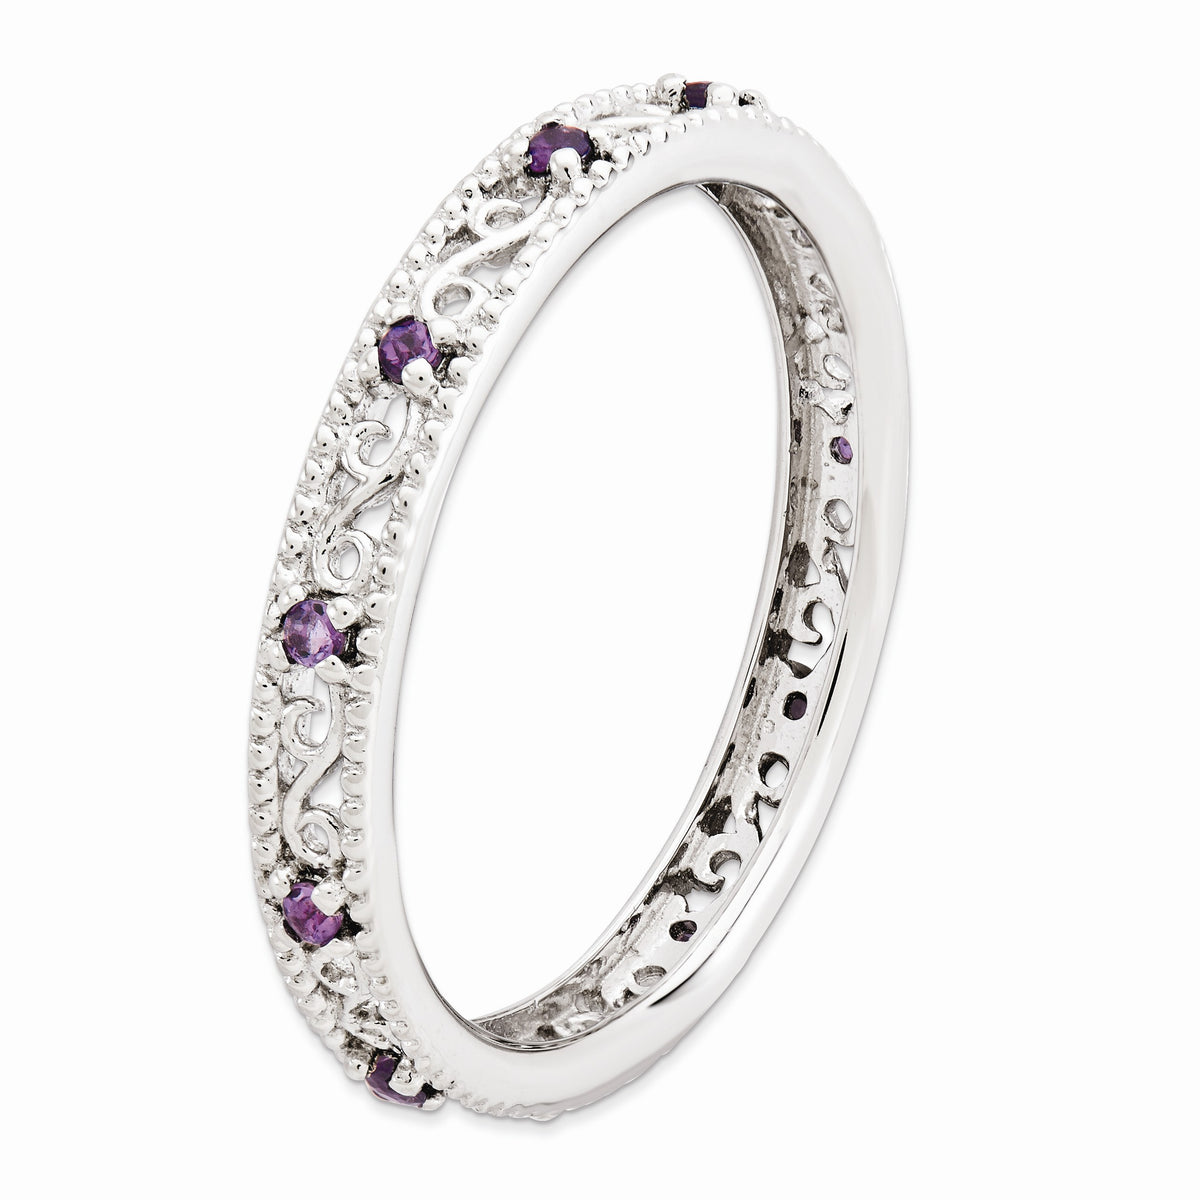 Alternate view of the 3mm Sterling Silver Stackable Expressions Amethyst Scroll Band by The Black Bow Jewelry Co.